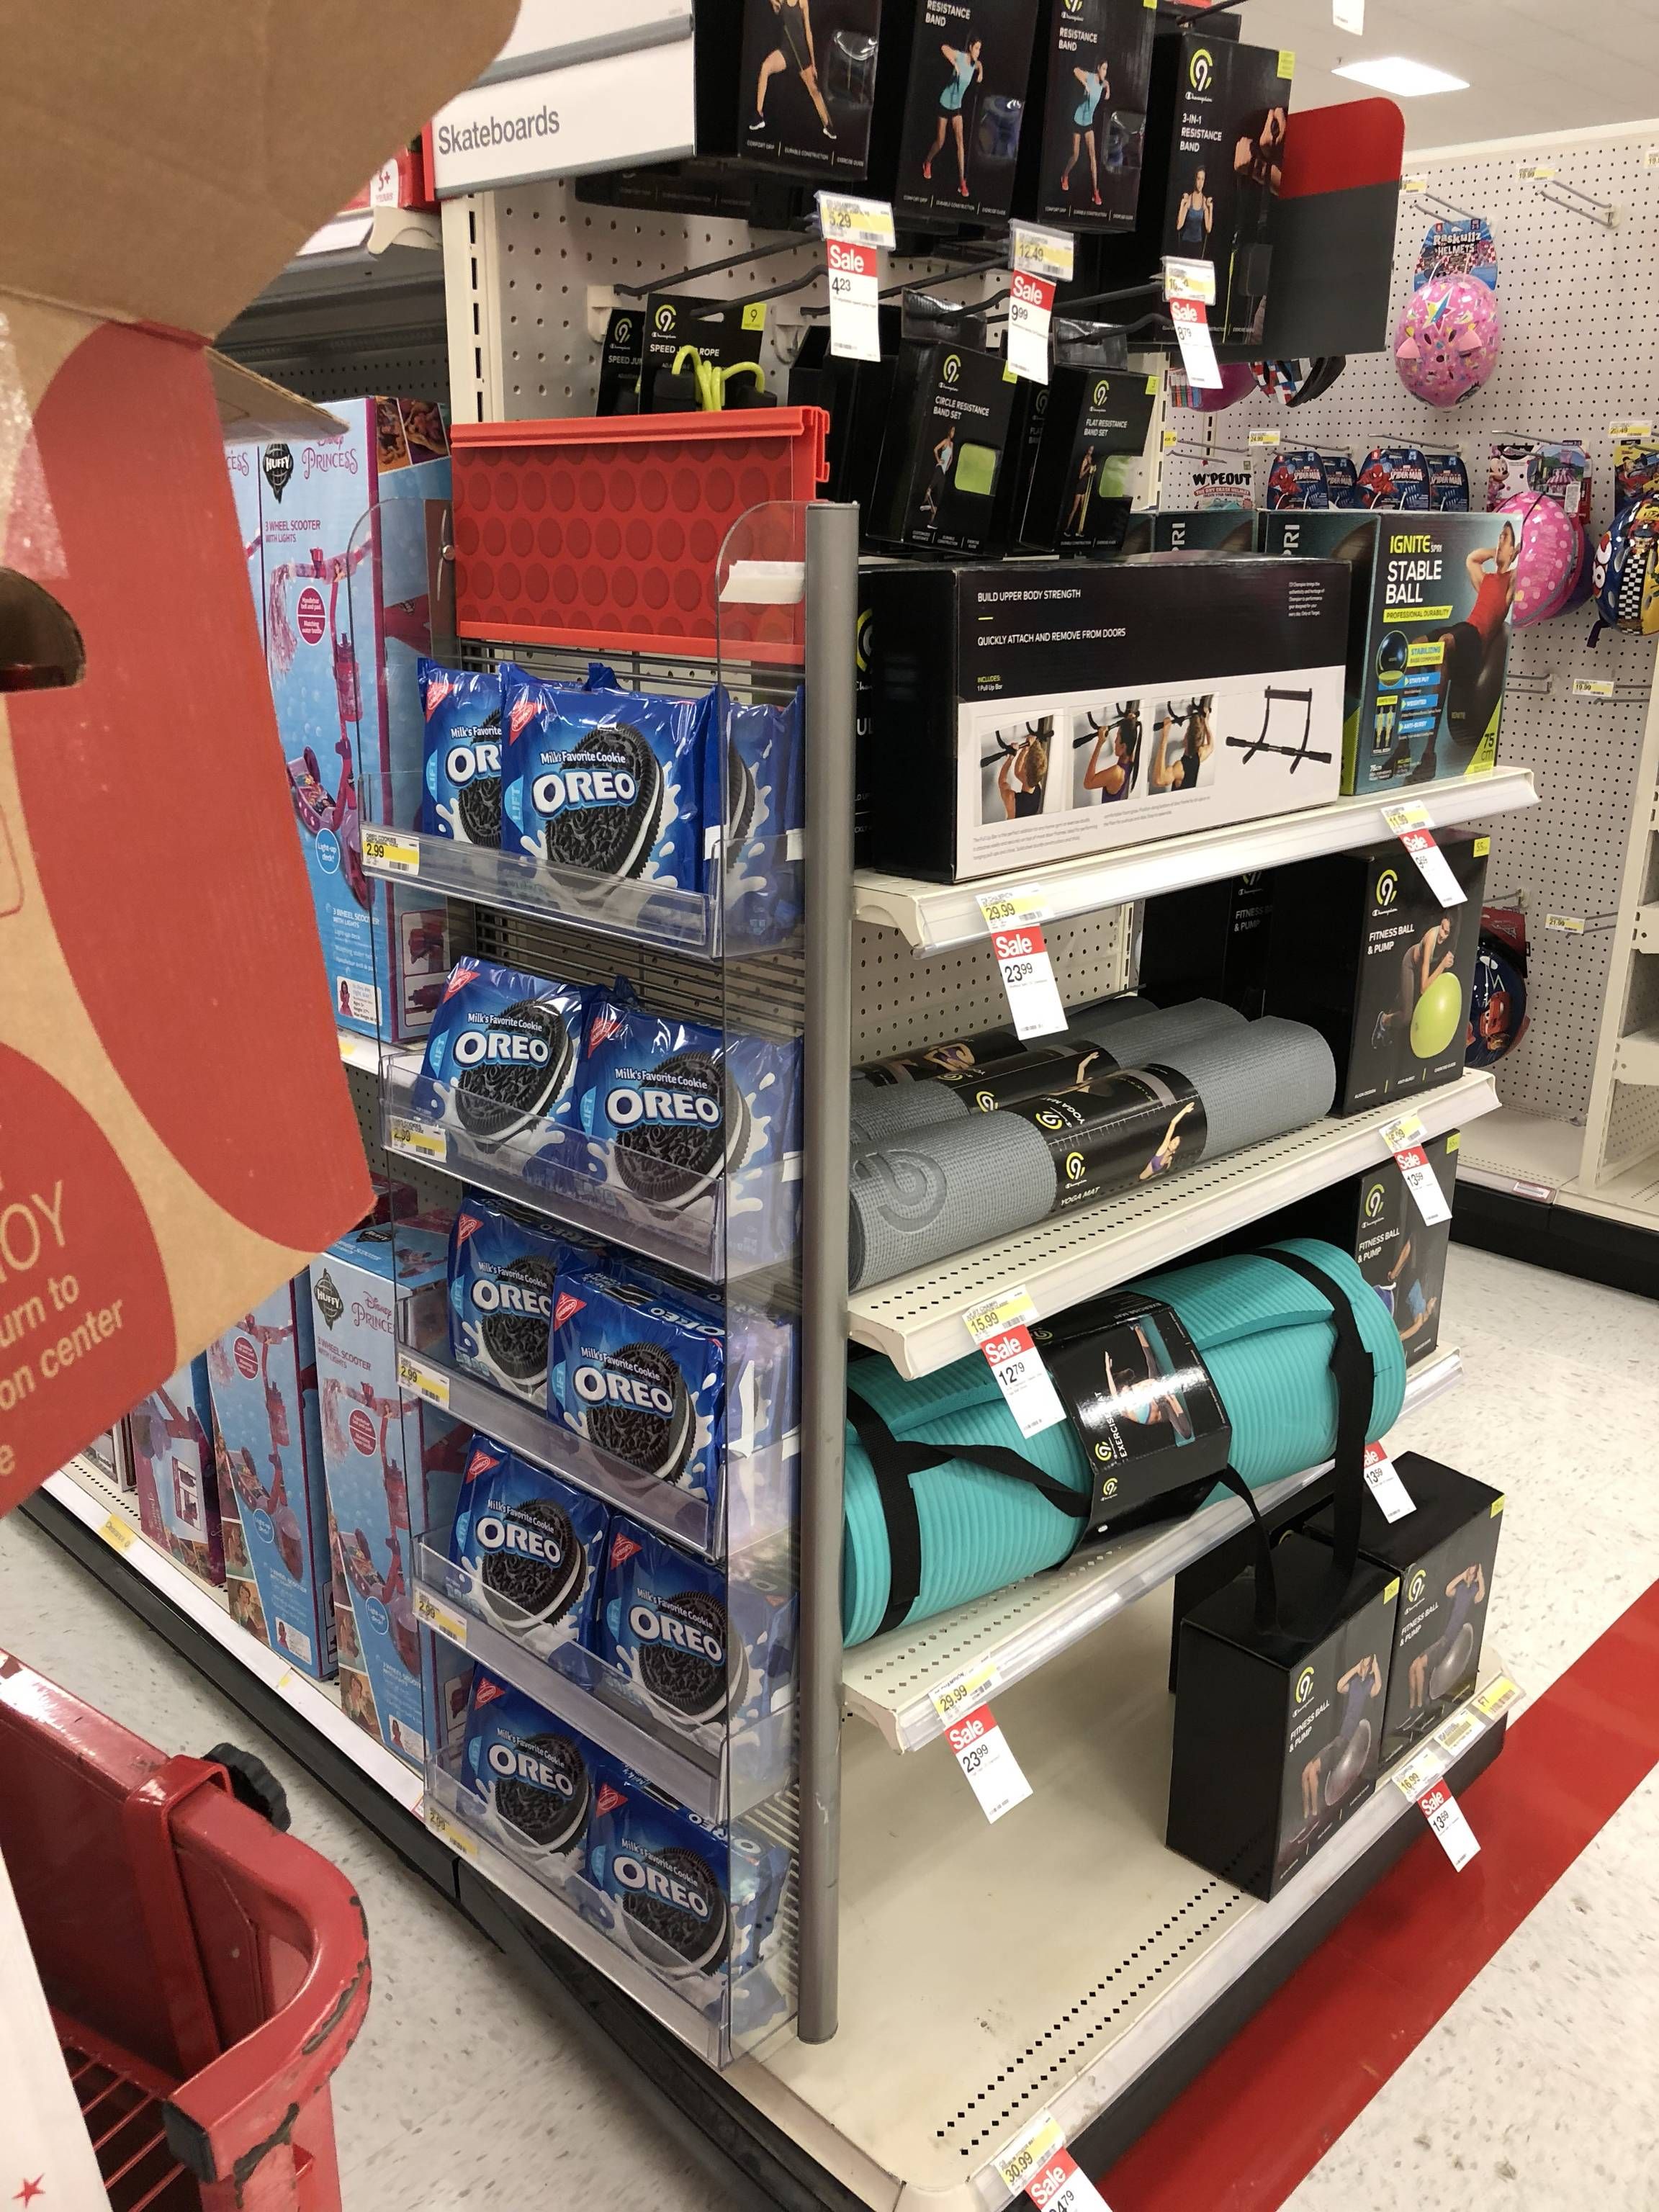 Target doesn’t want me to succeed.